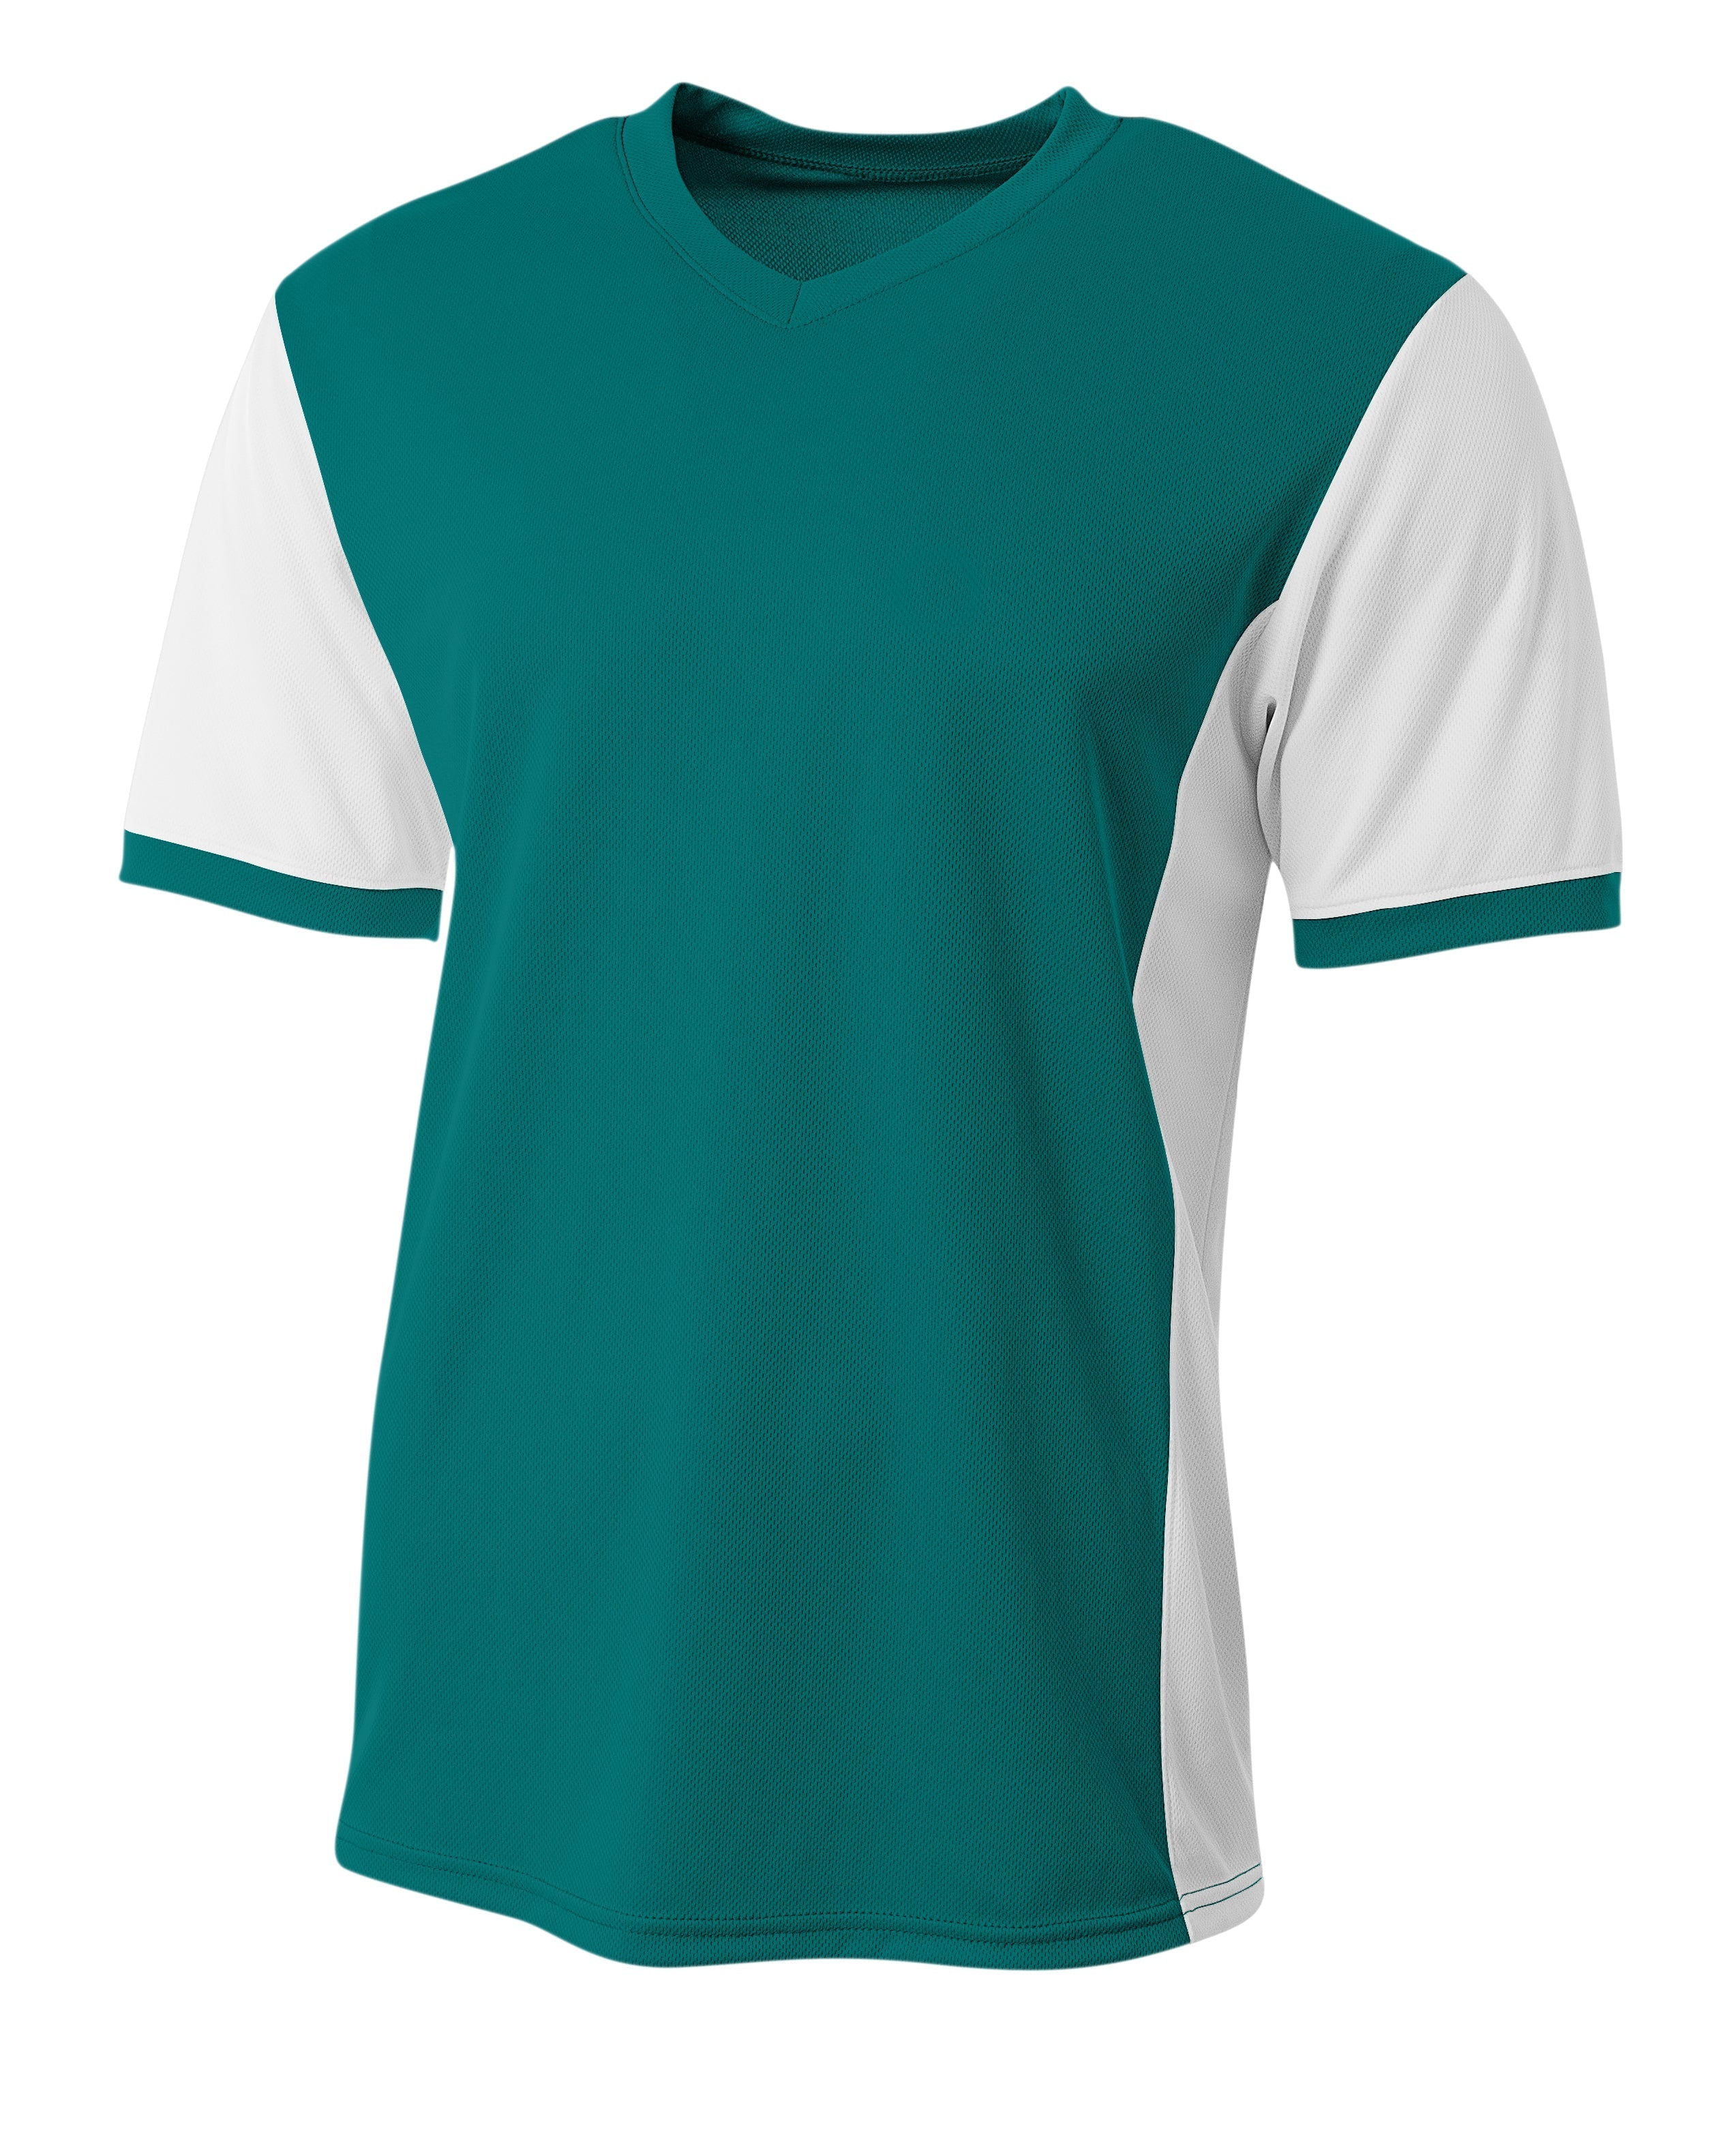 A4 Premier Adult Soccer Jersey - Youth Sports Products